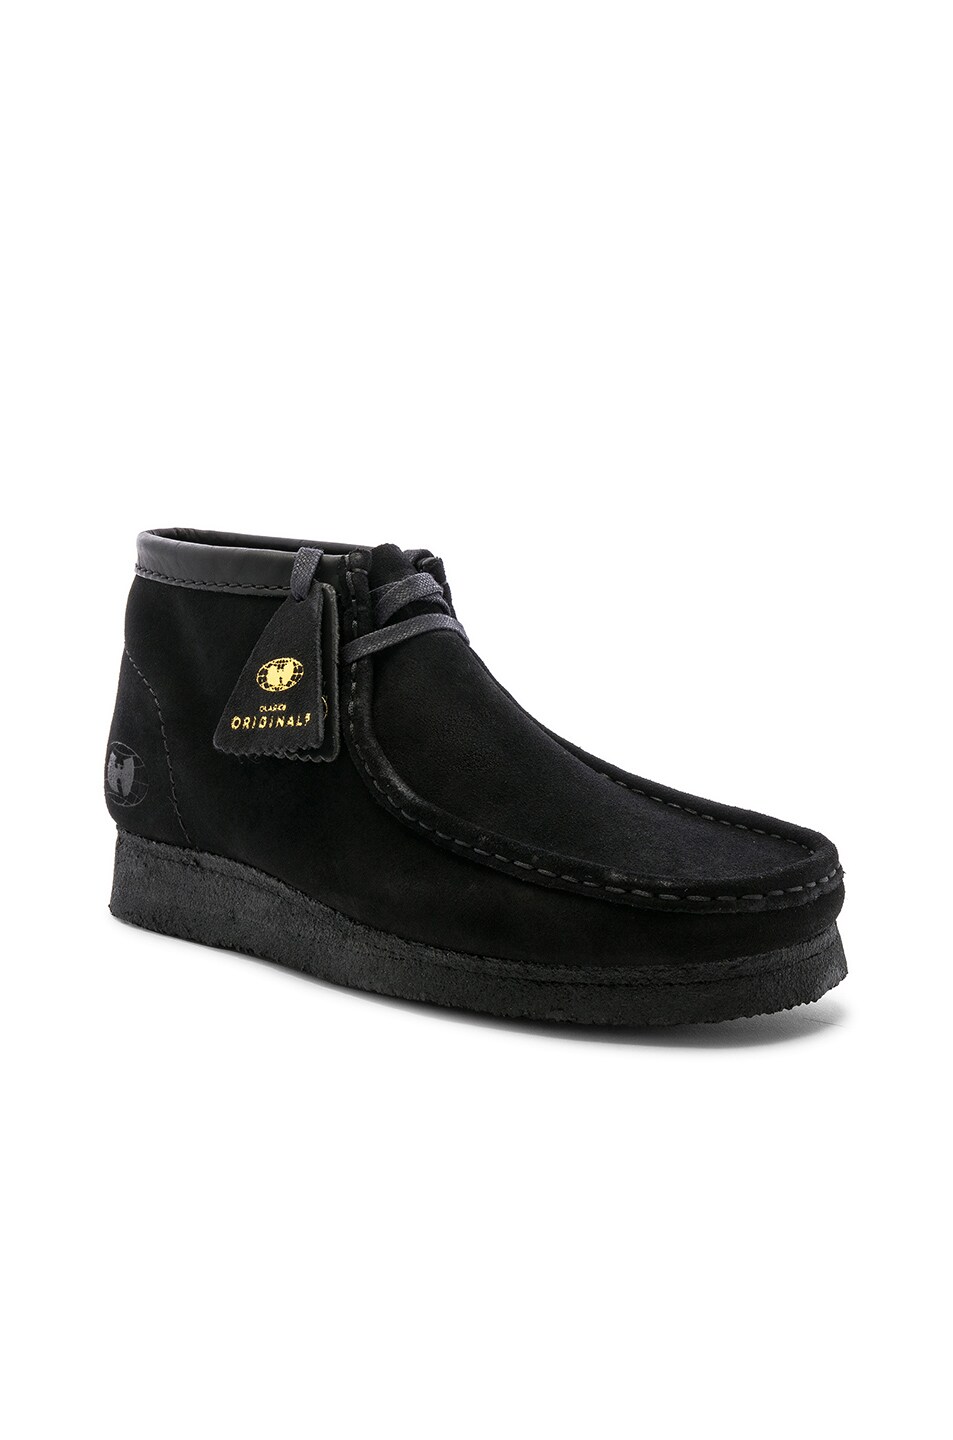 Image 1 of Clarks x Wu Tang 36th Chamber in Black & Crust